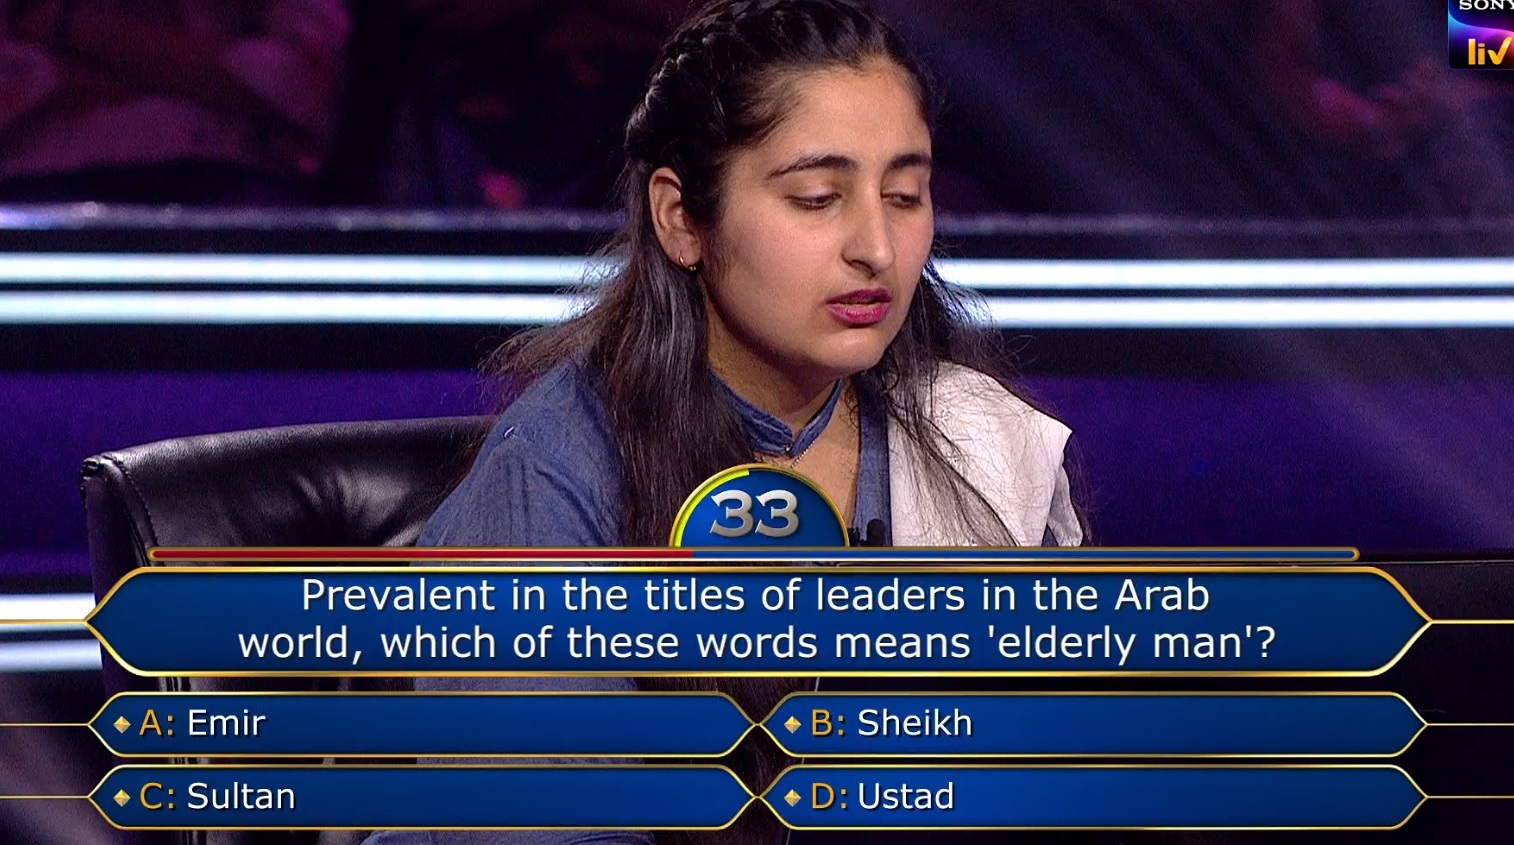 Ques : Prevalent in the titles of leaders in the Arab world, which of these words means ‘elderly man’?